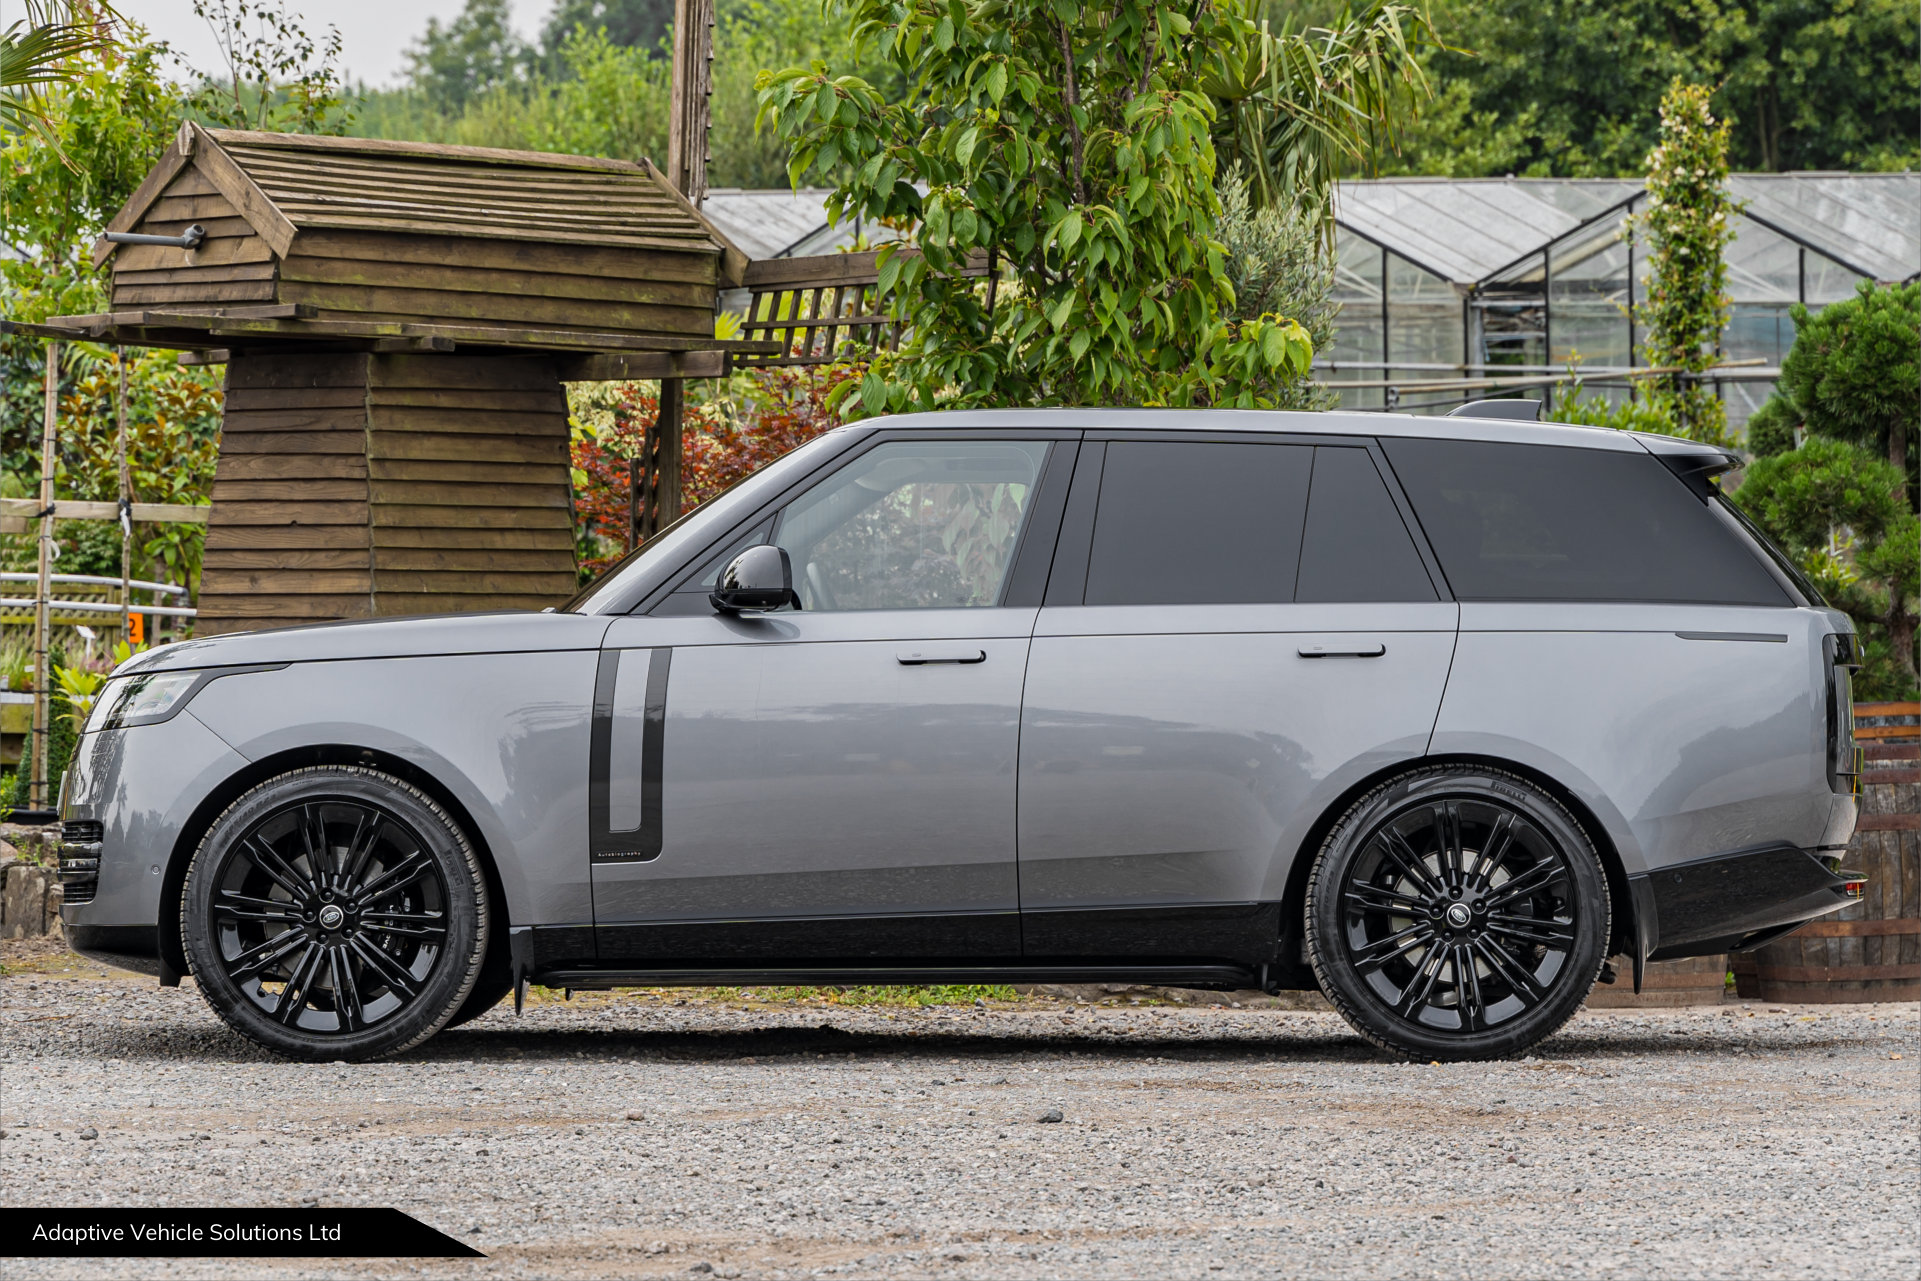 2022 Range Rover P400 Autobiography near side low